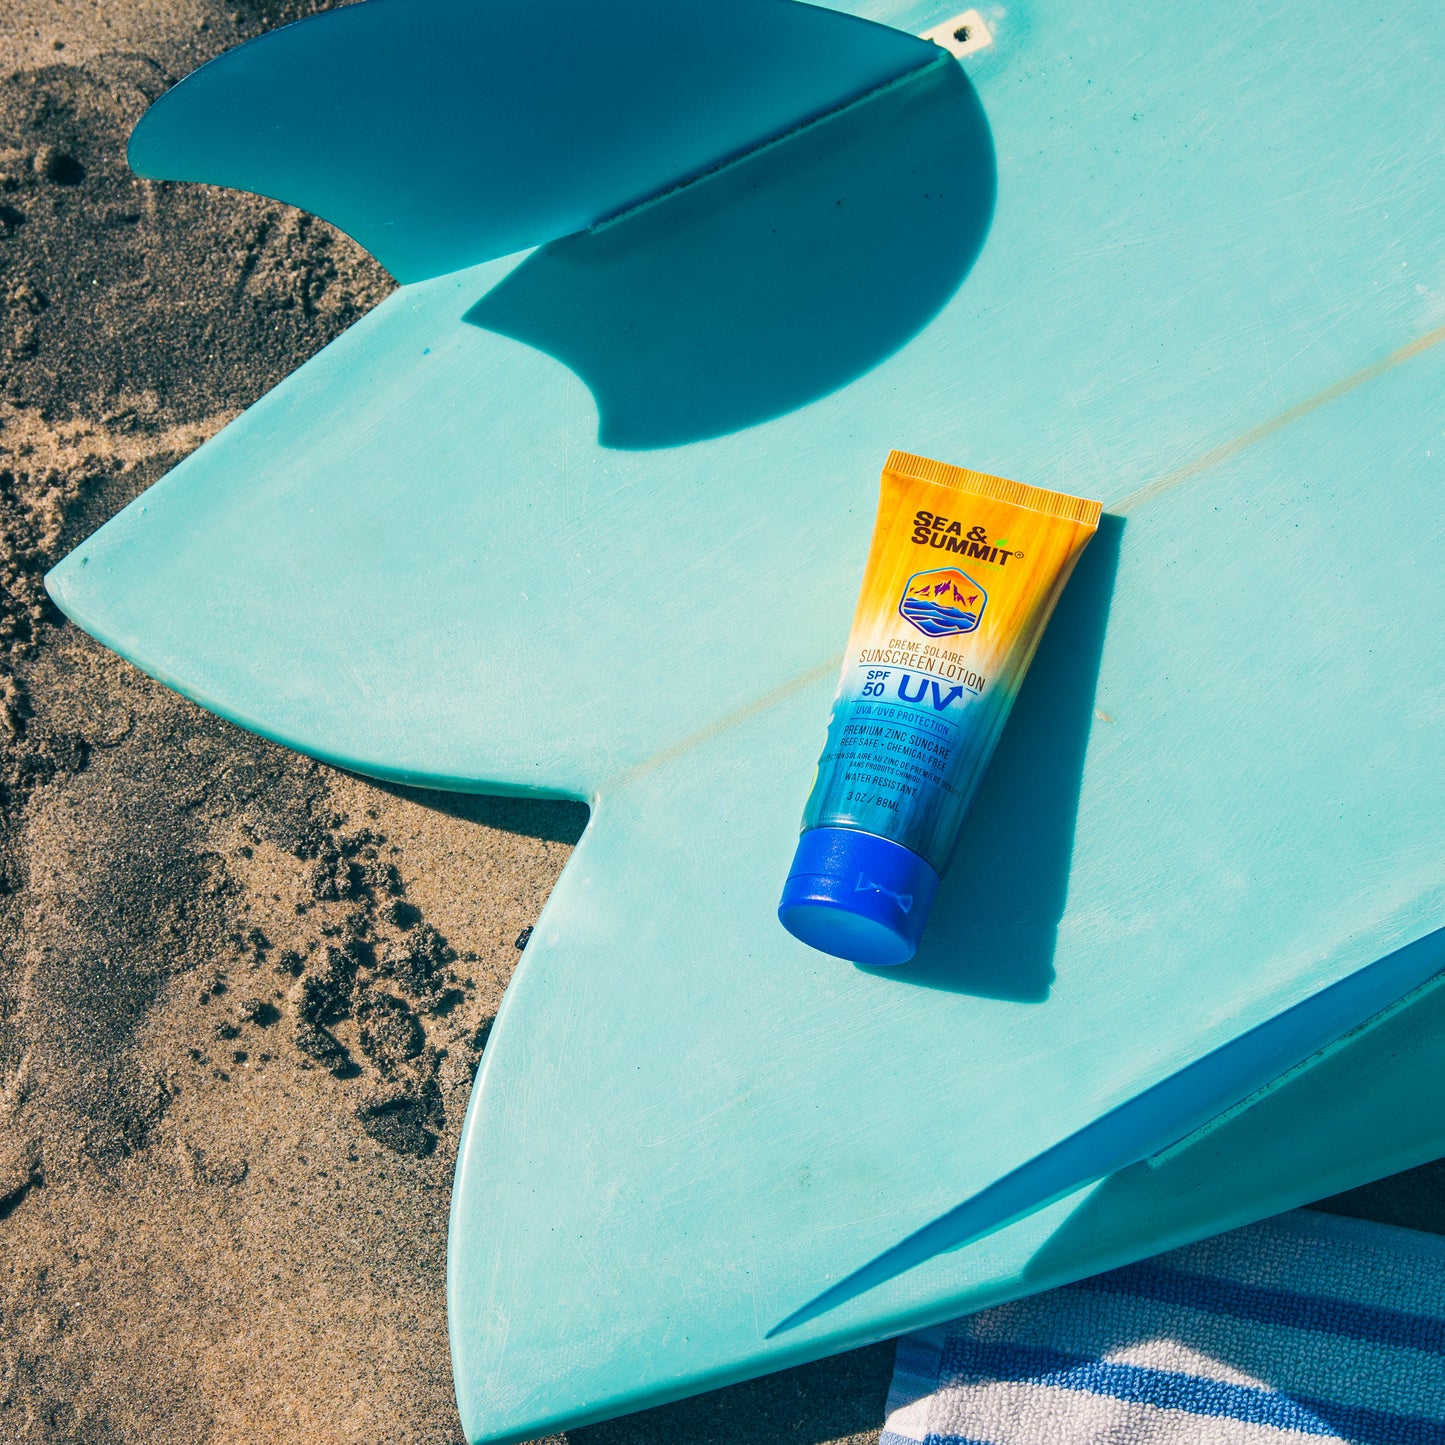 SPF 50 natural lotion in a recycled plastic tube, lies on a surfboard at the beach